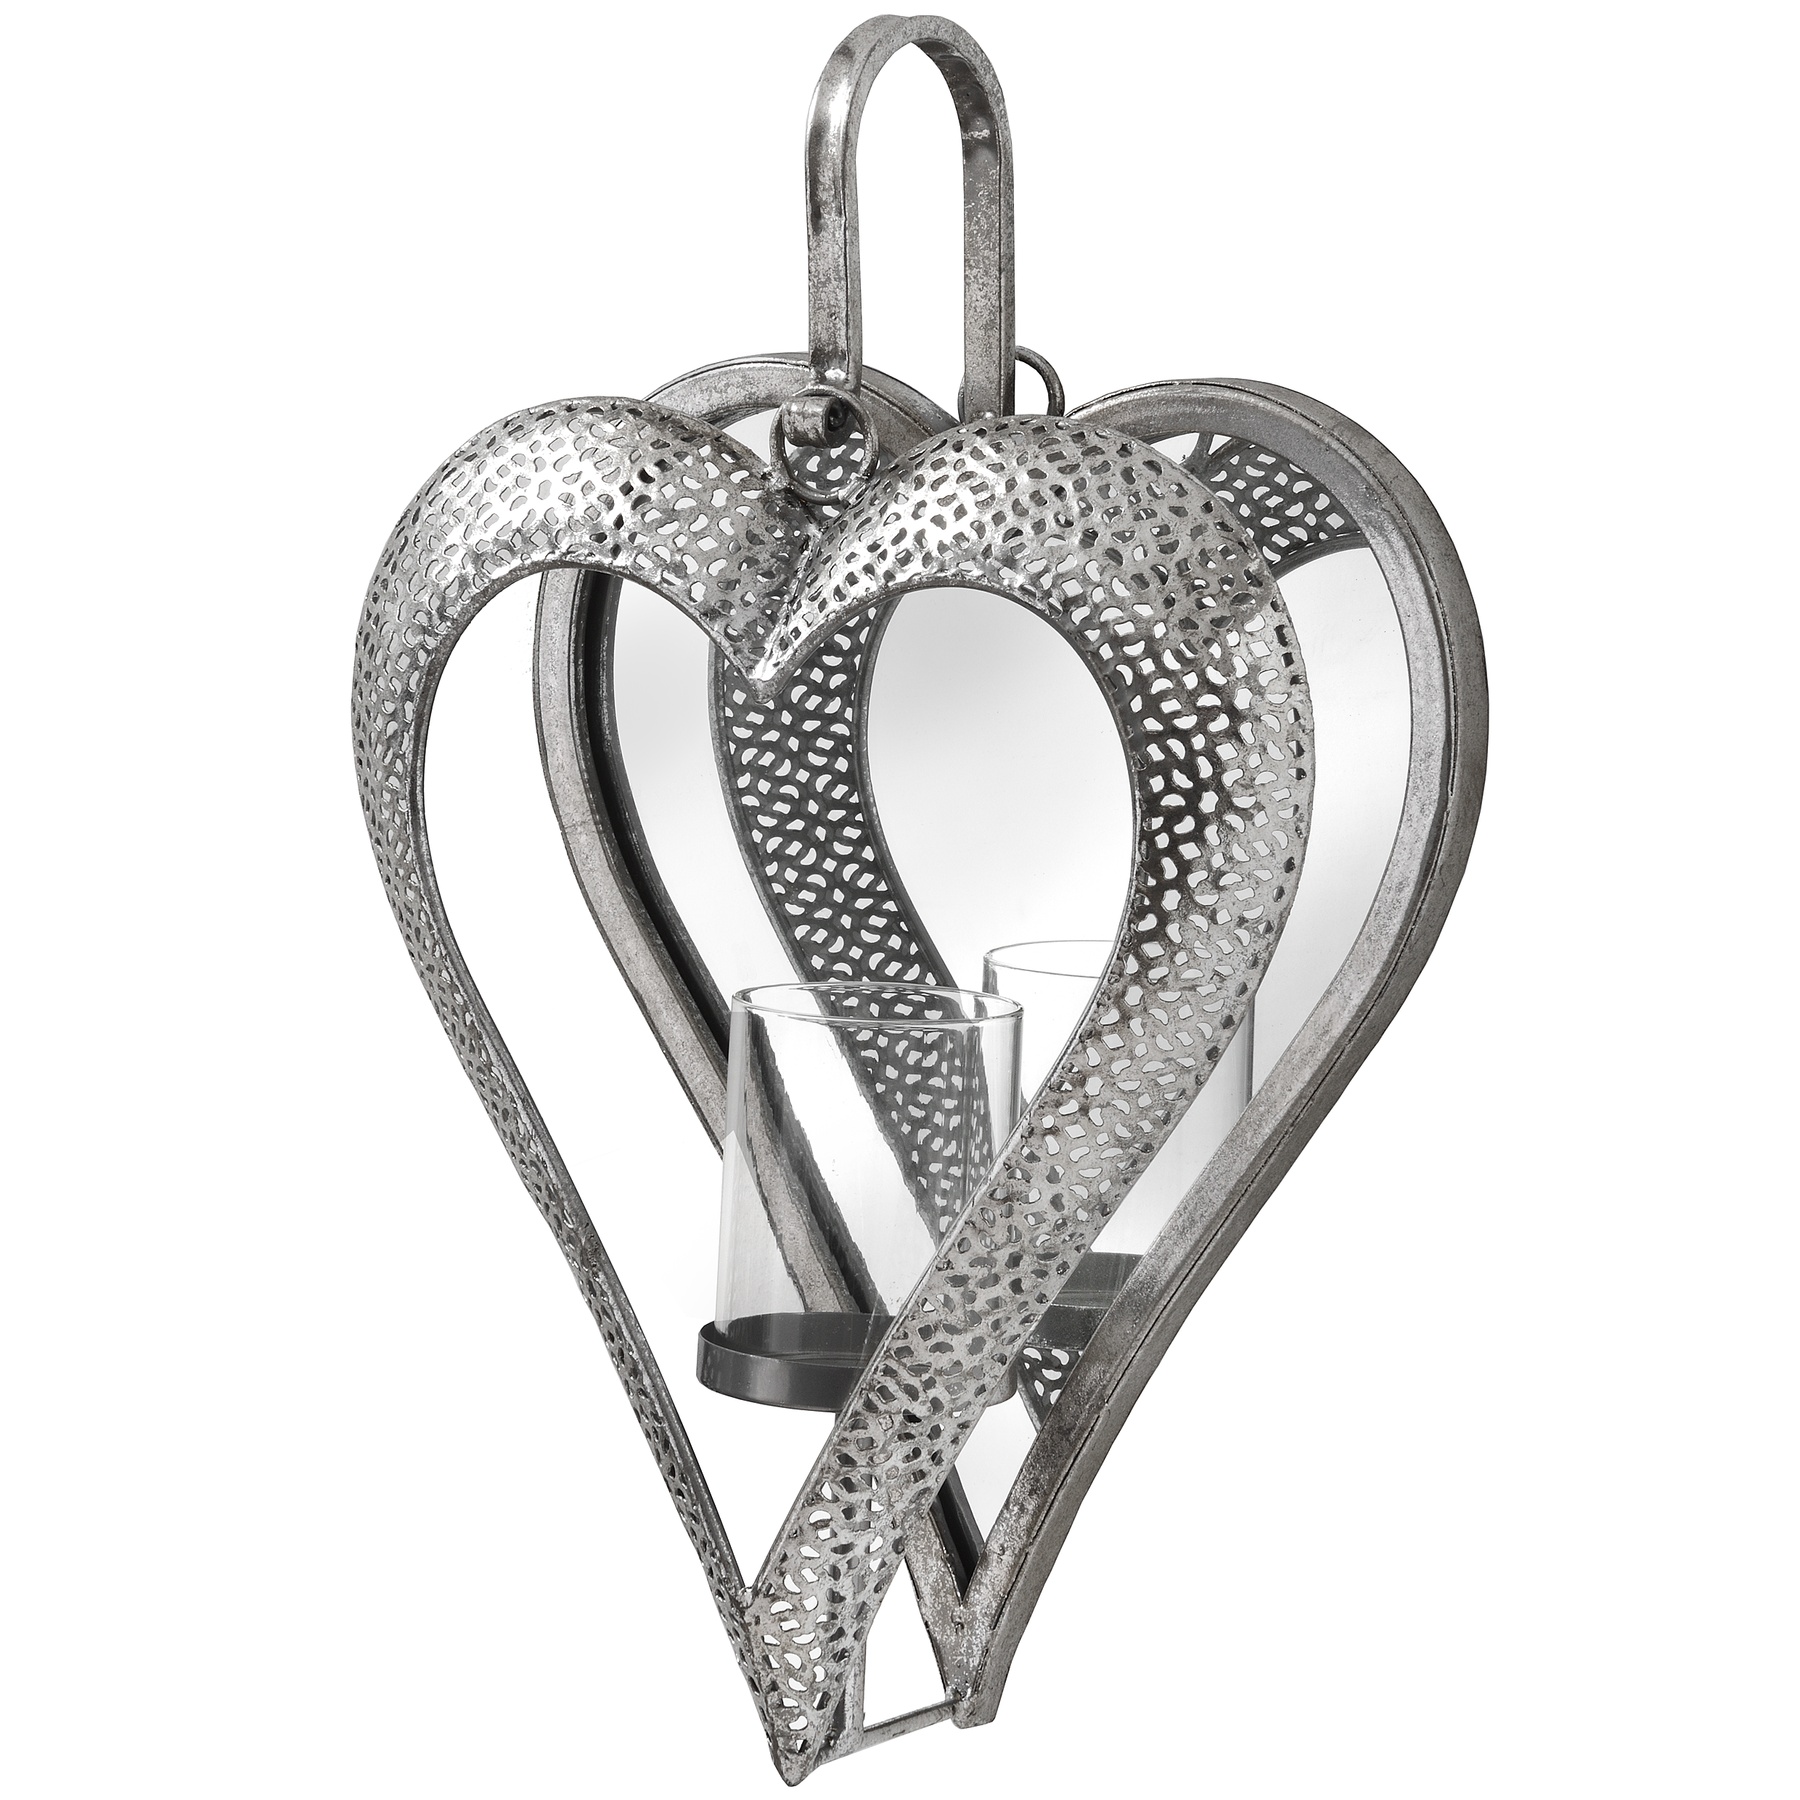 Antique Silver Heart Mirrored Tealight Holder in Small - Image 1